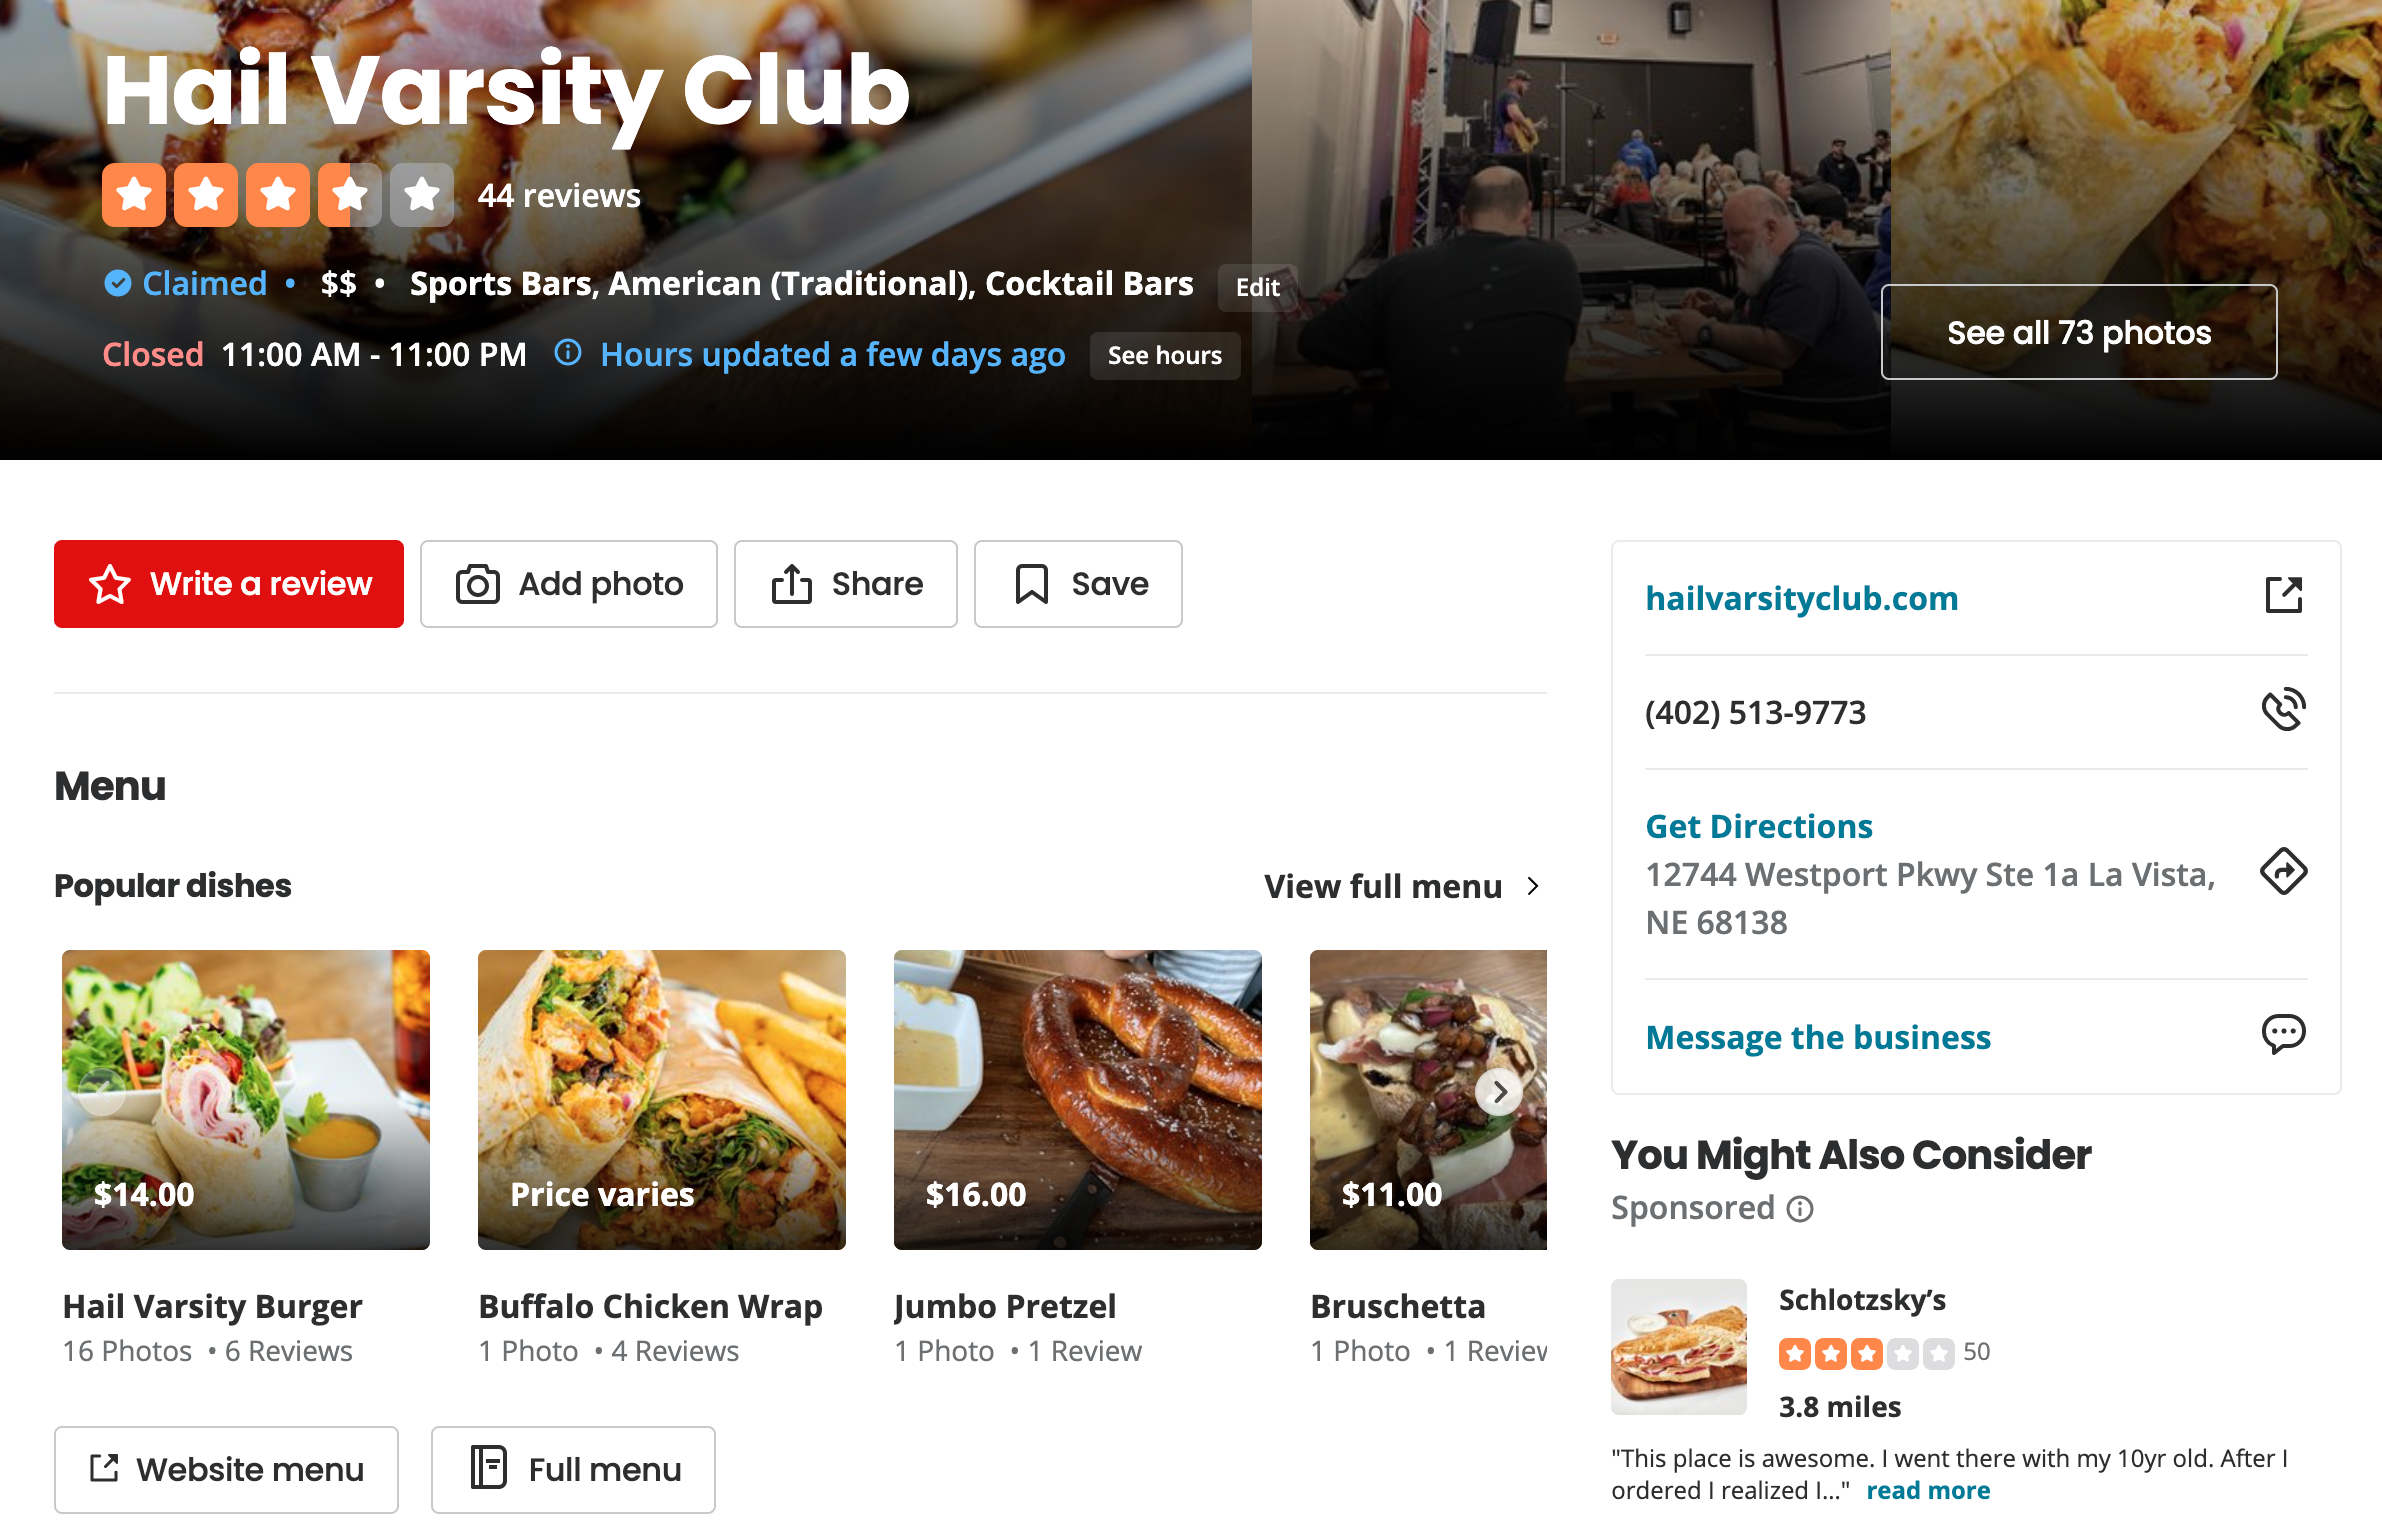 Screenshot of Hail Varsity Club Yelp page with all business details like business category, address, menu items, and more filled out